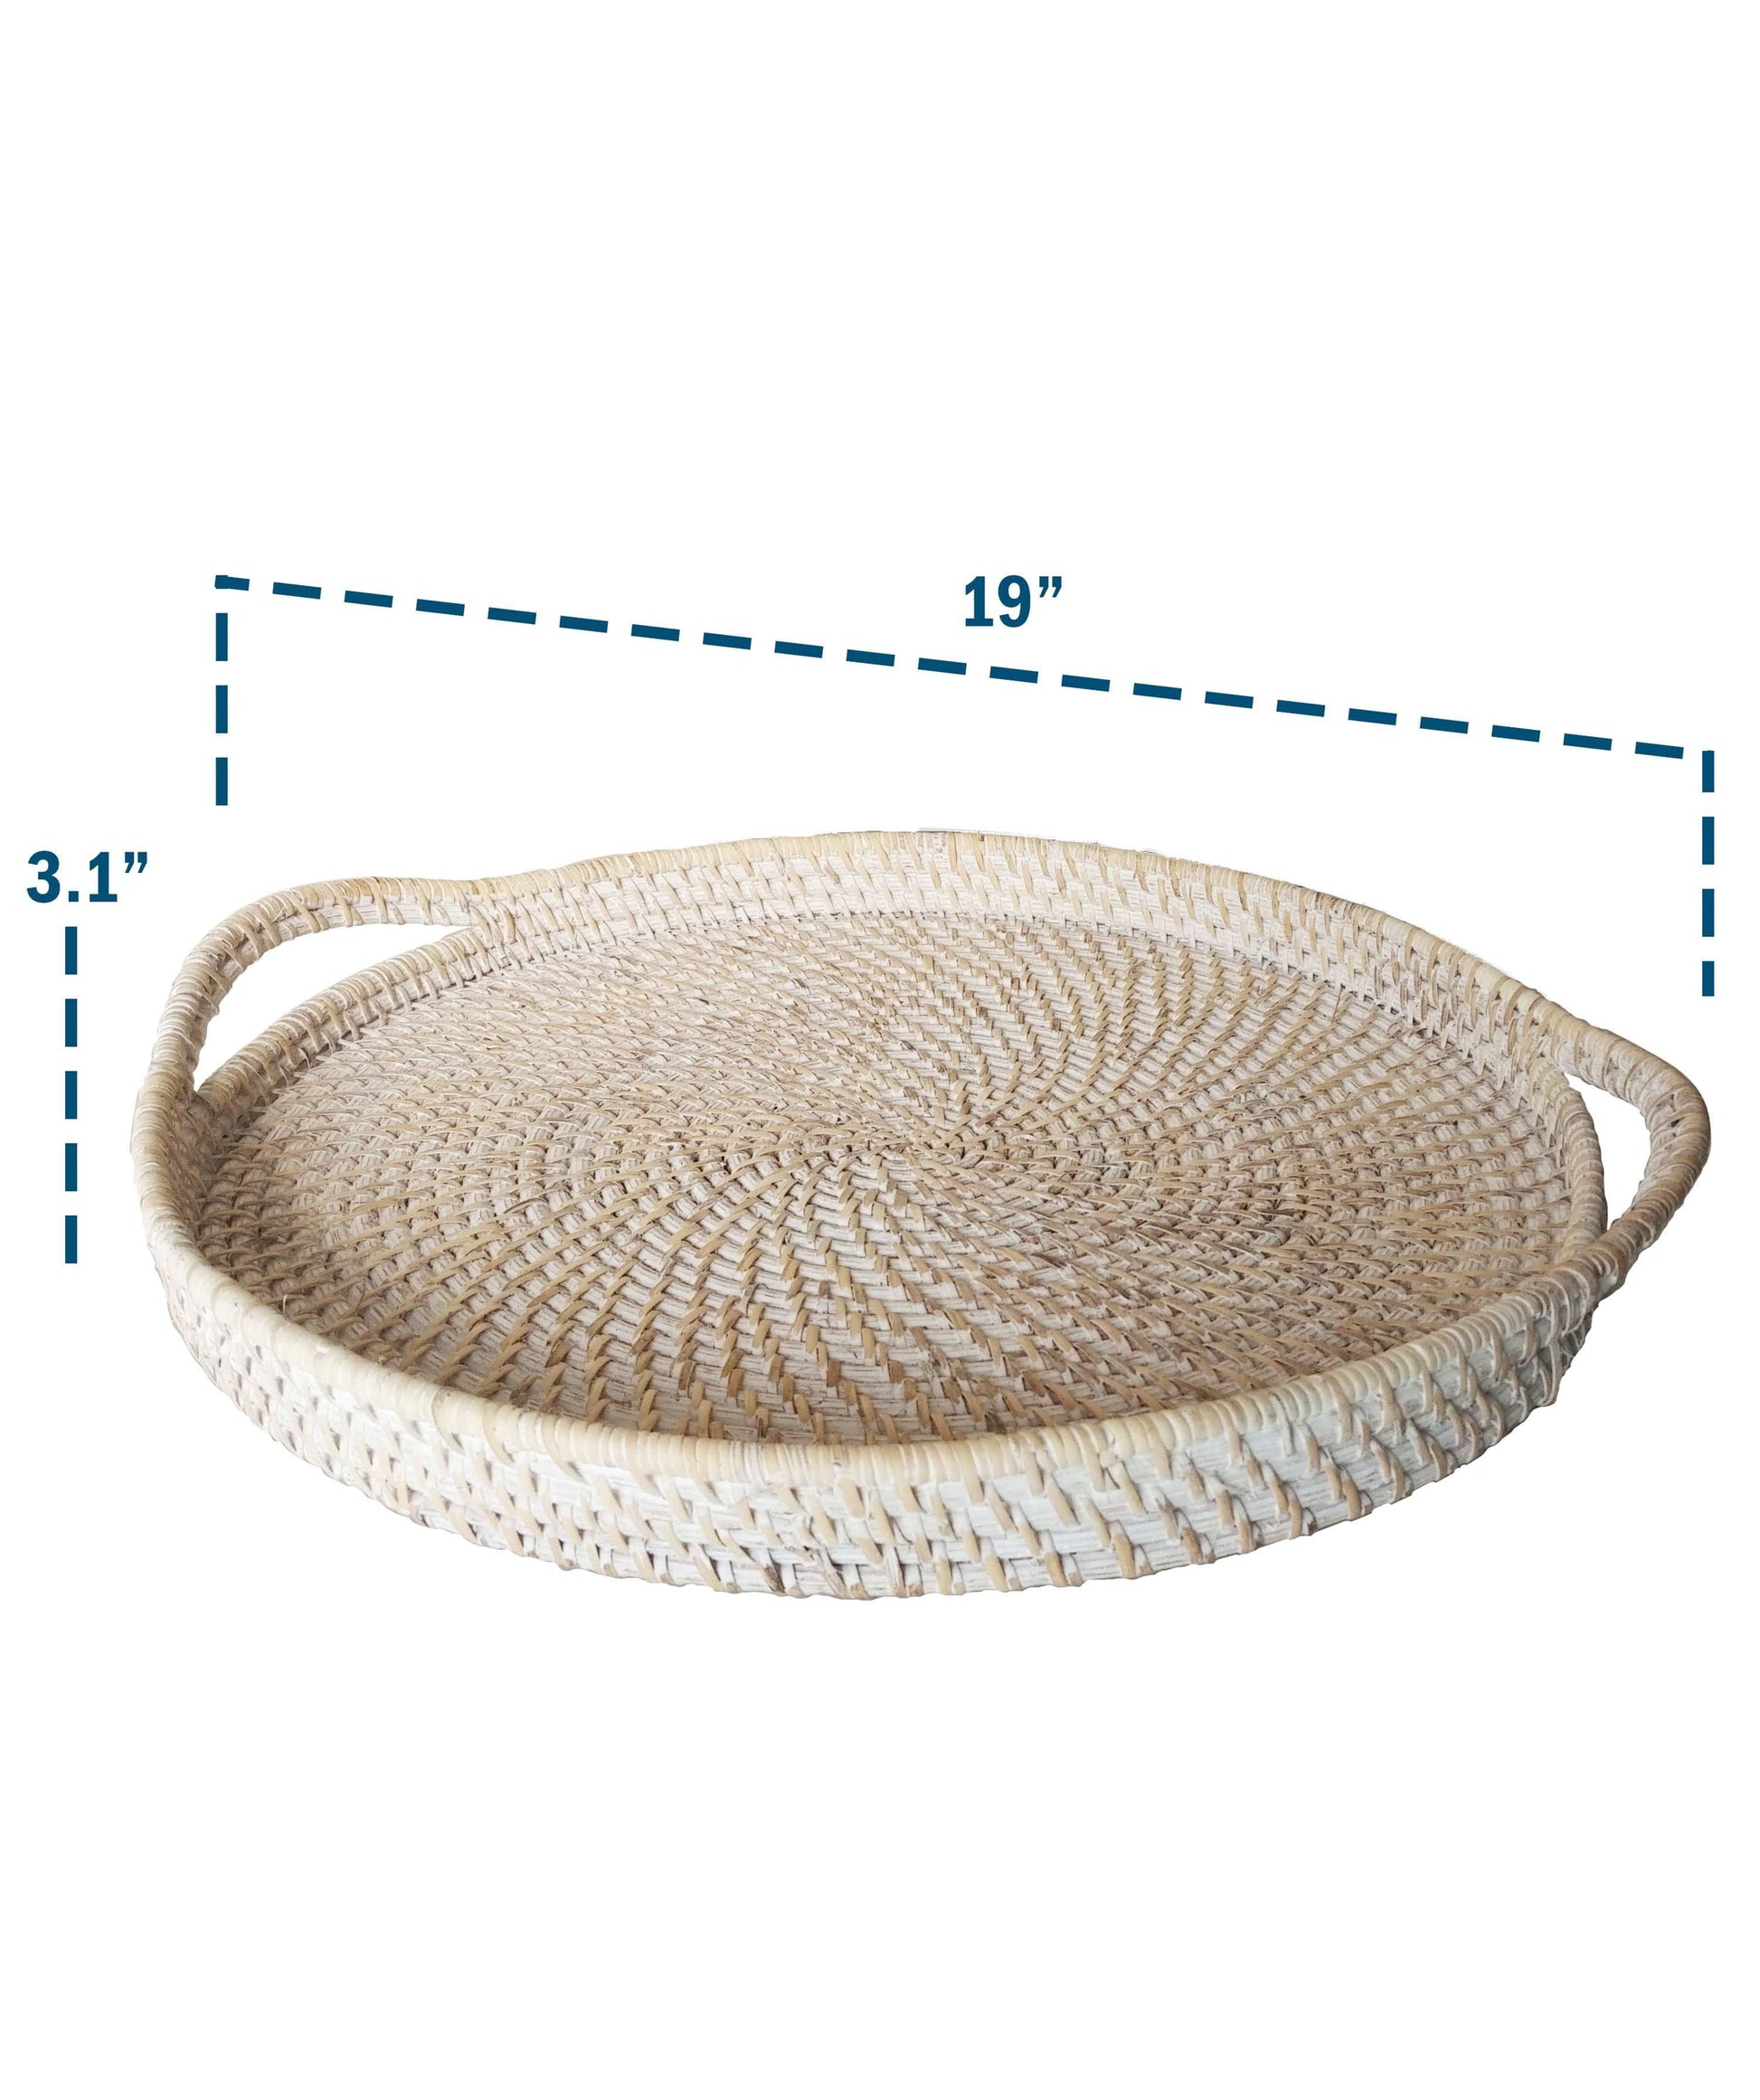 Round Wicker Serving Trays with Handles (19-Inch) | For Serving & Tabletop Display - Almondscove